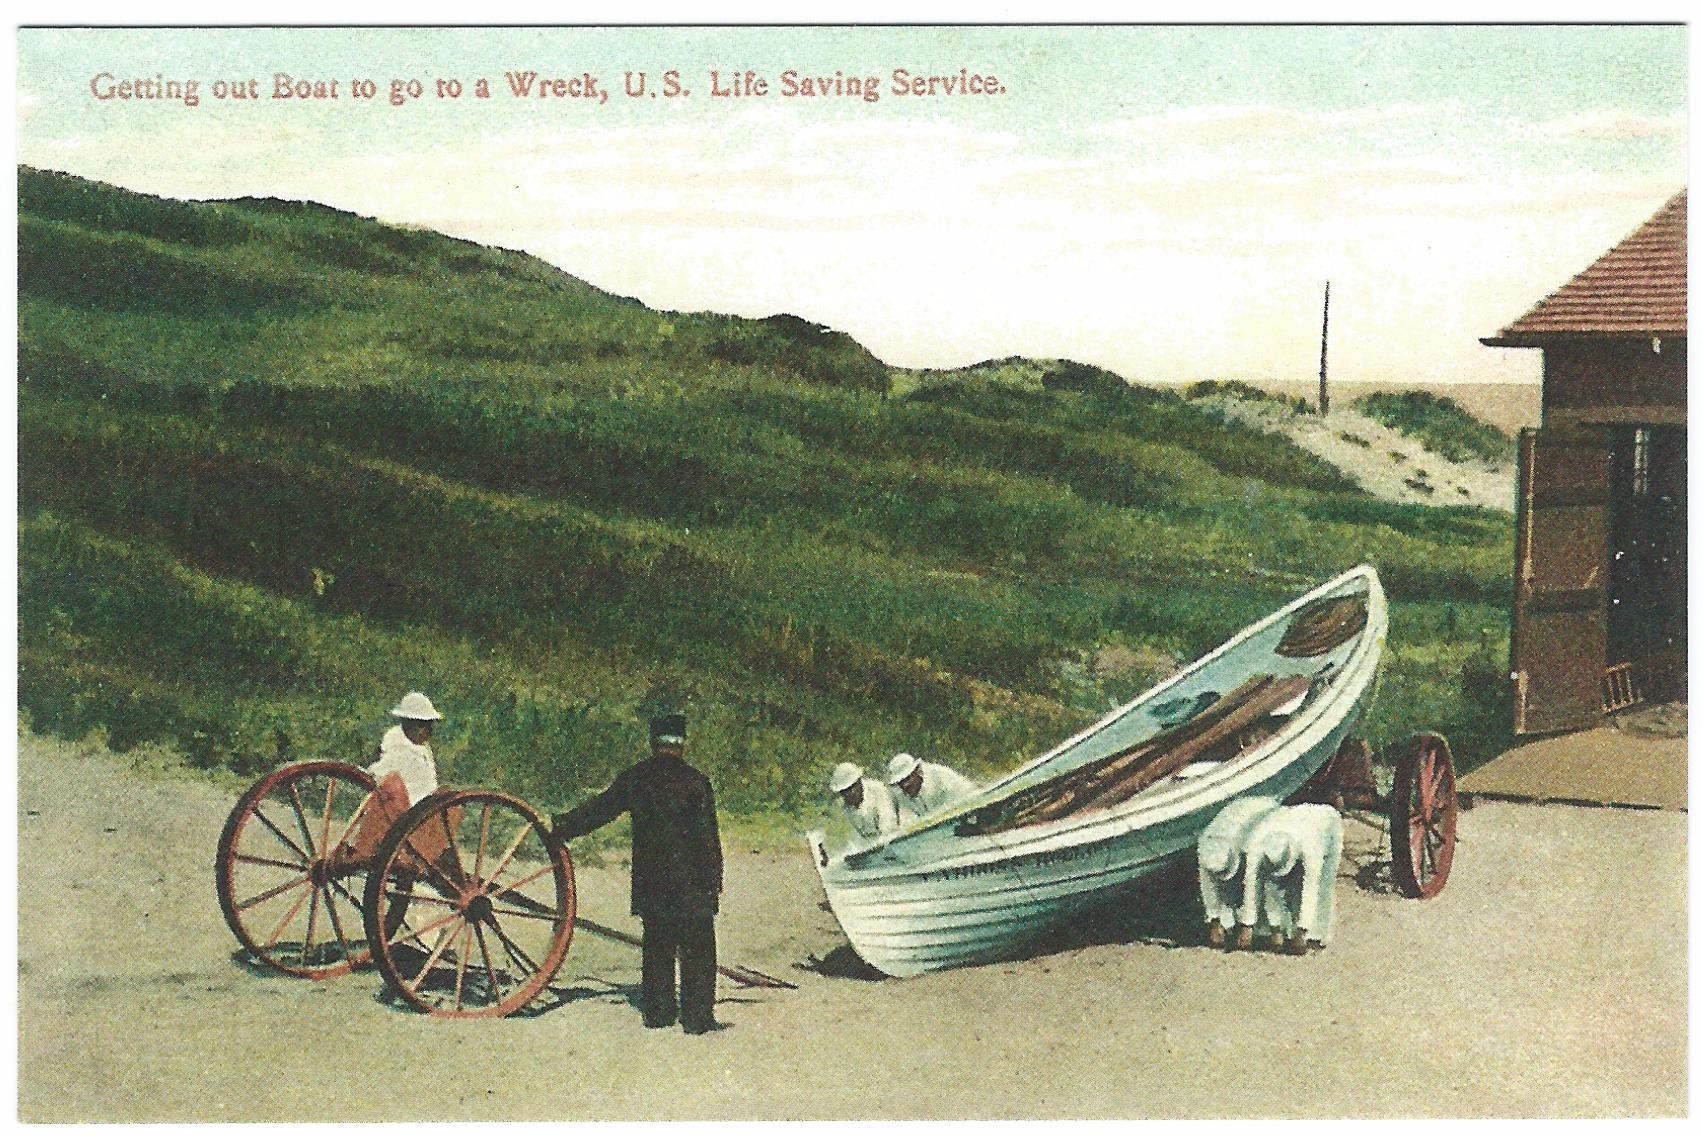 US Life Saving Service: Getting Out Boat to go to Wreck Postcard